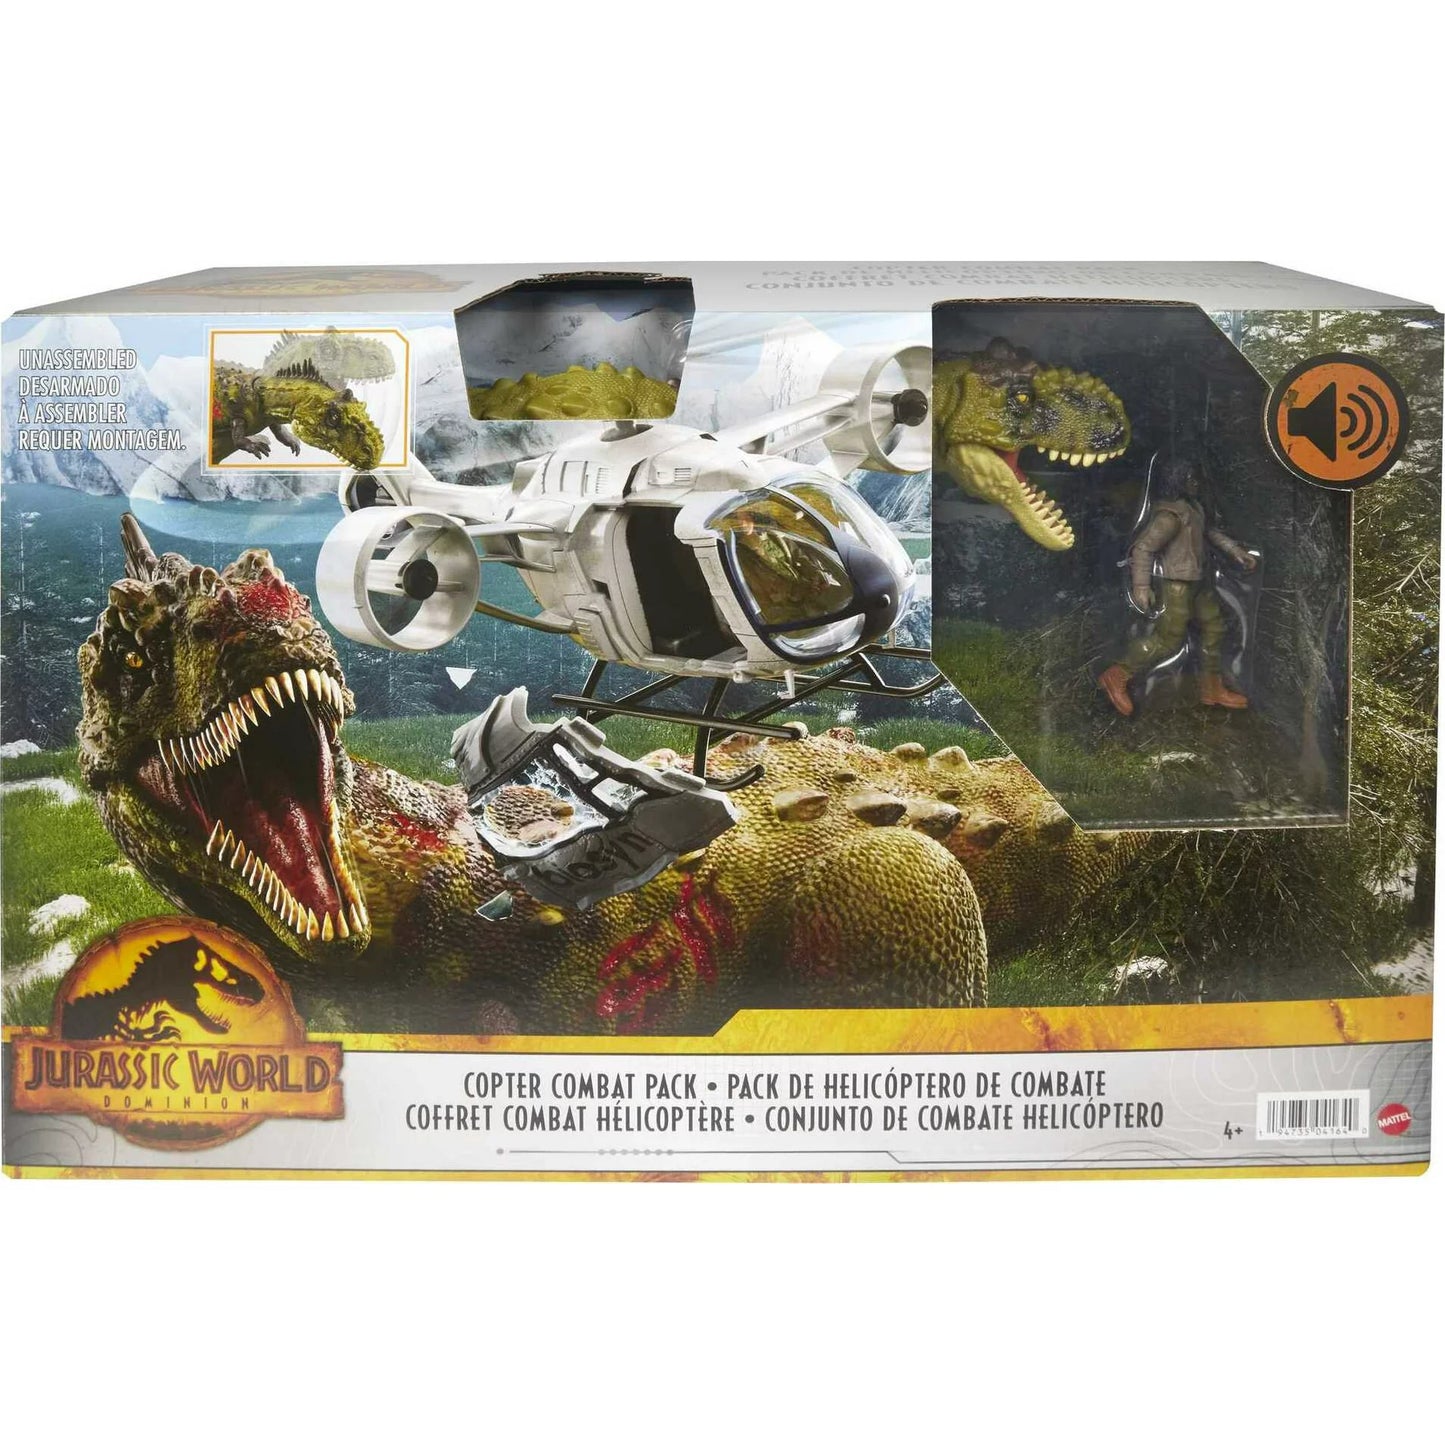 Jurassic World Dominion Copter Combat Pack with Helicopter, DinosaurToy & Kayla Action Figure